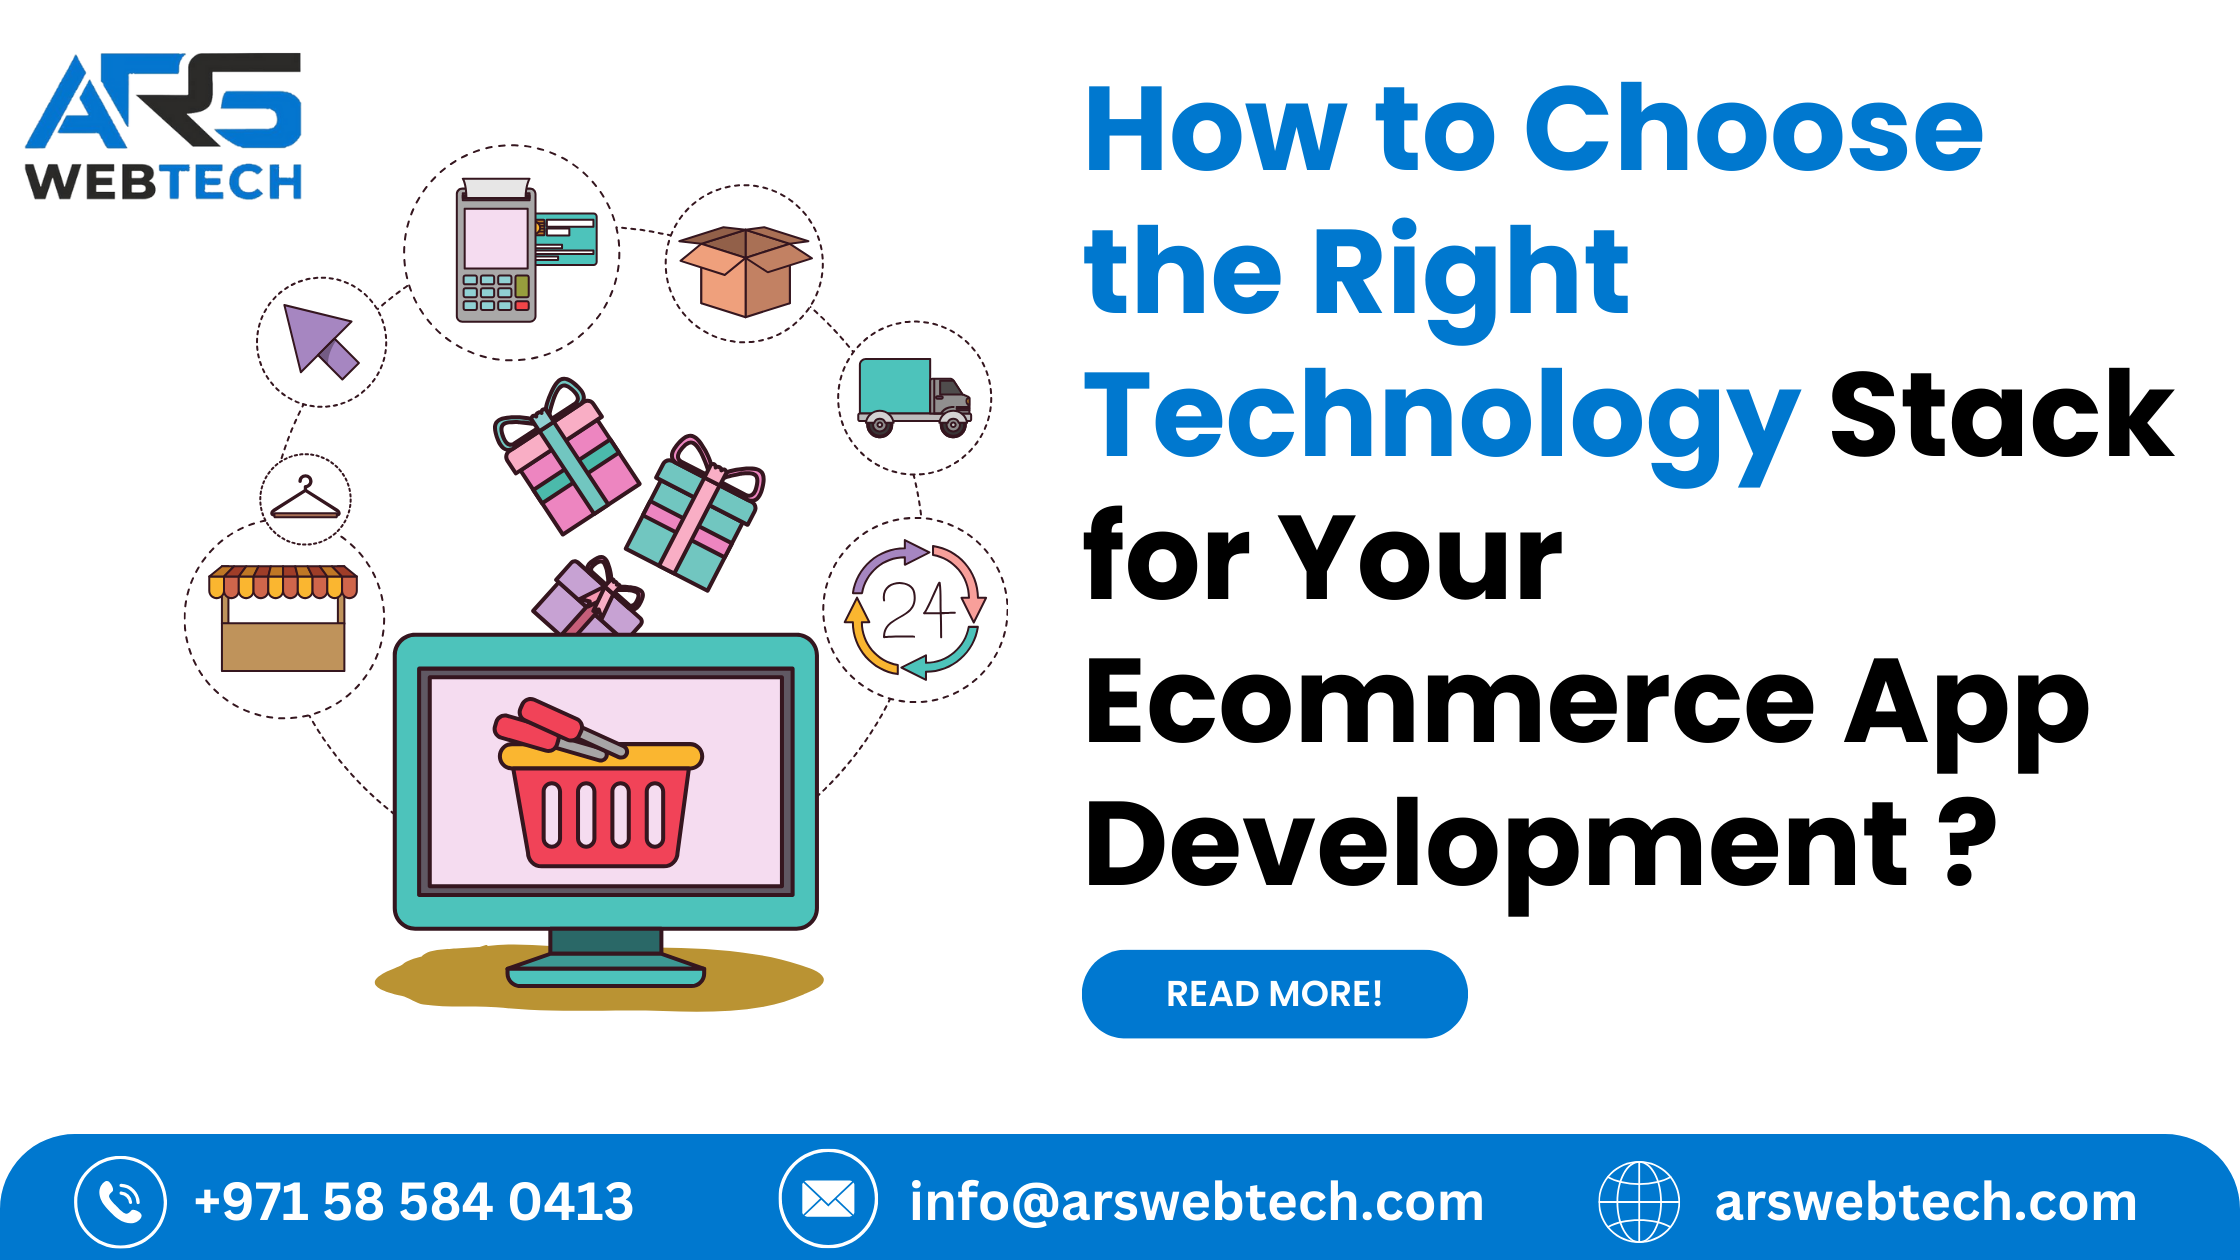 How to Choose the Right Technology Stack for Your Ecommerce App Development